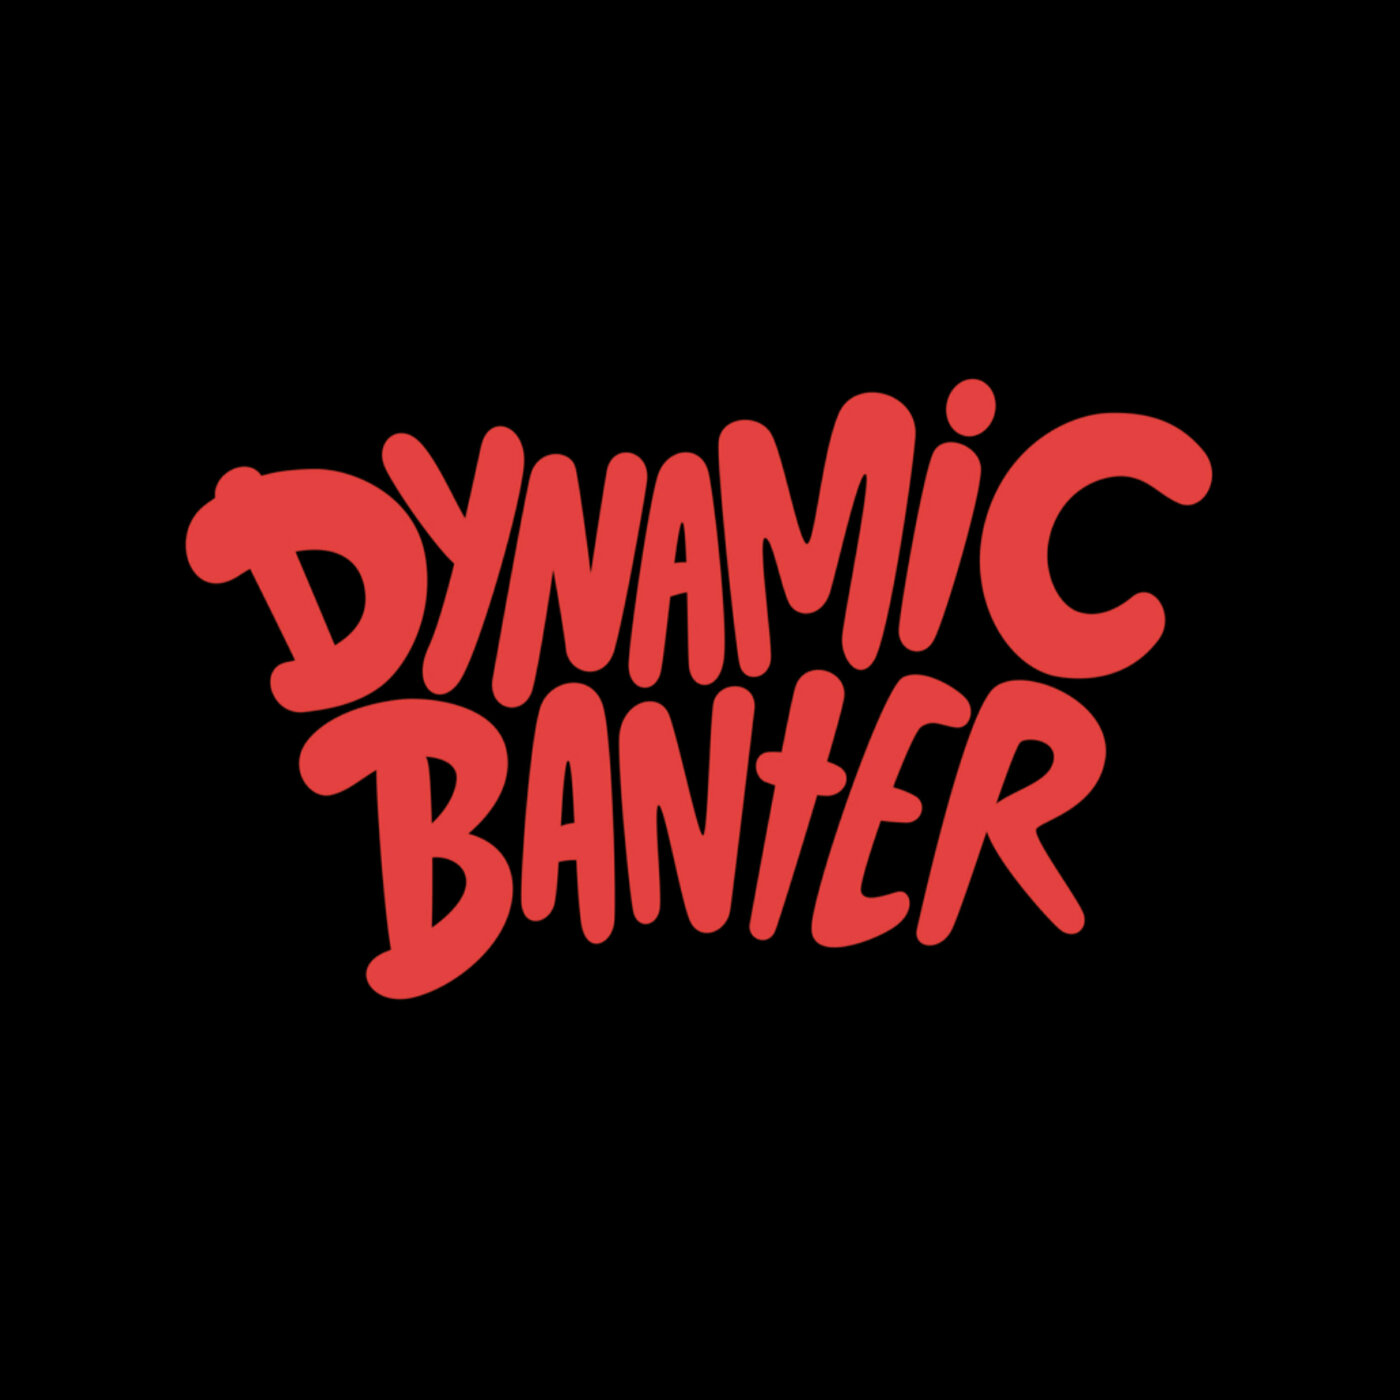 Episode 89 - Dynamic Banter Live at The Open Space!